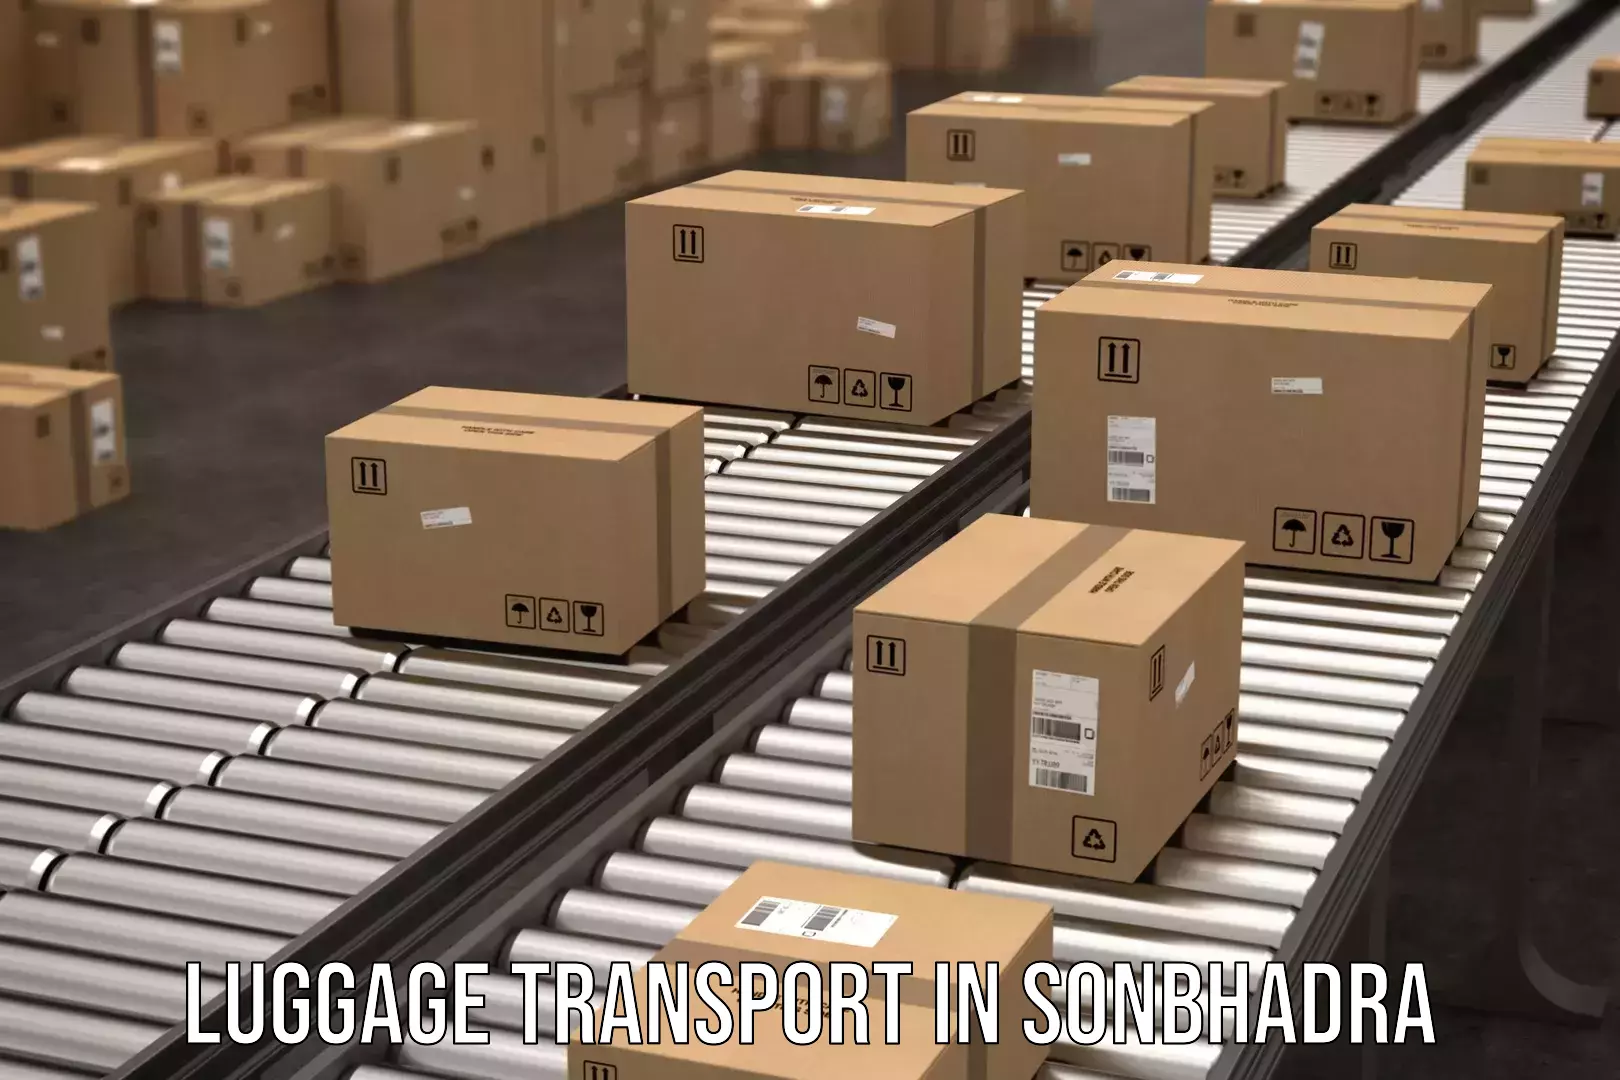 Baggage transport technology in Sonbhadra